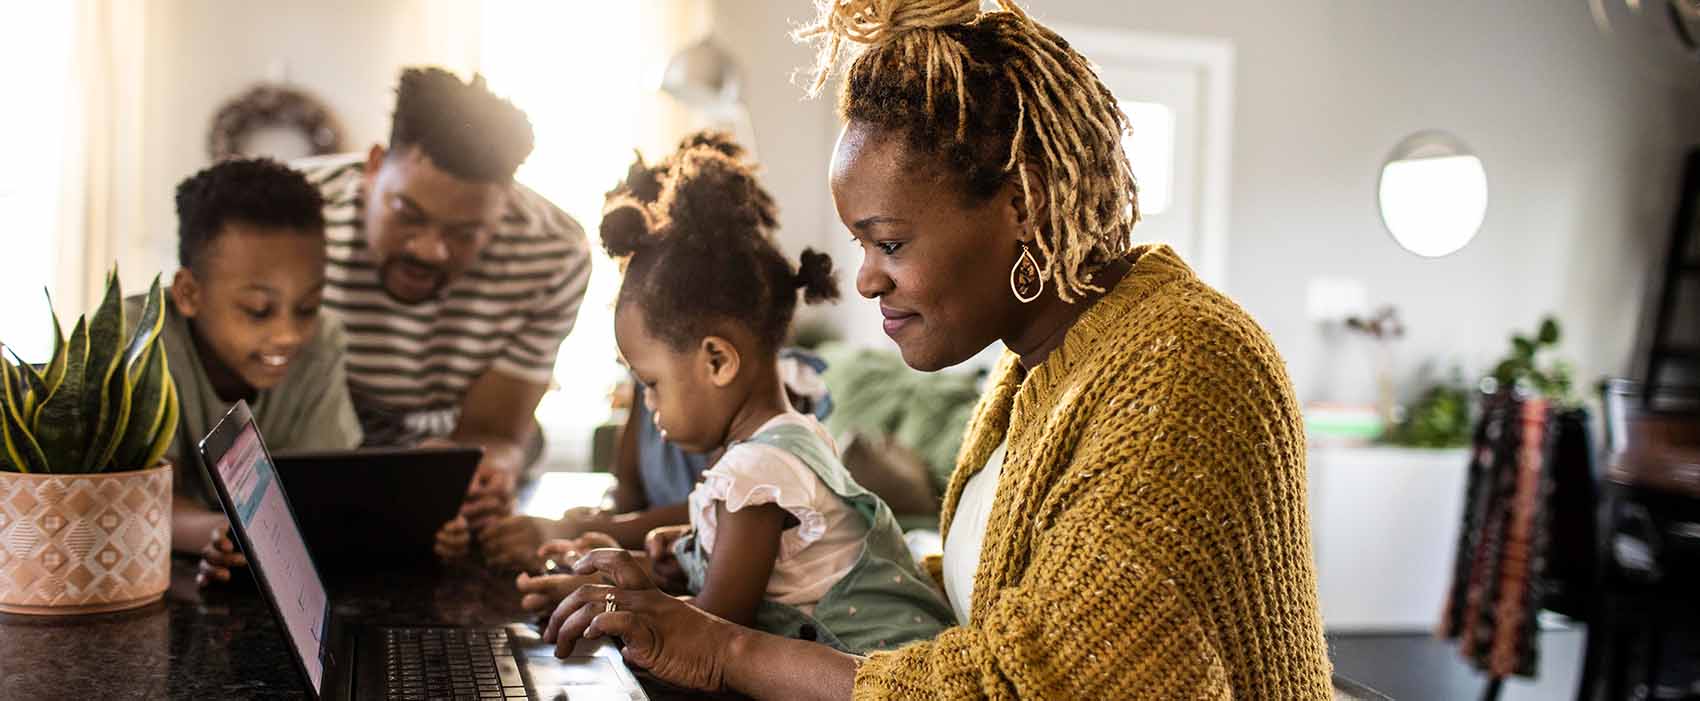 Mother working from home while holding toddler, family in background